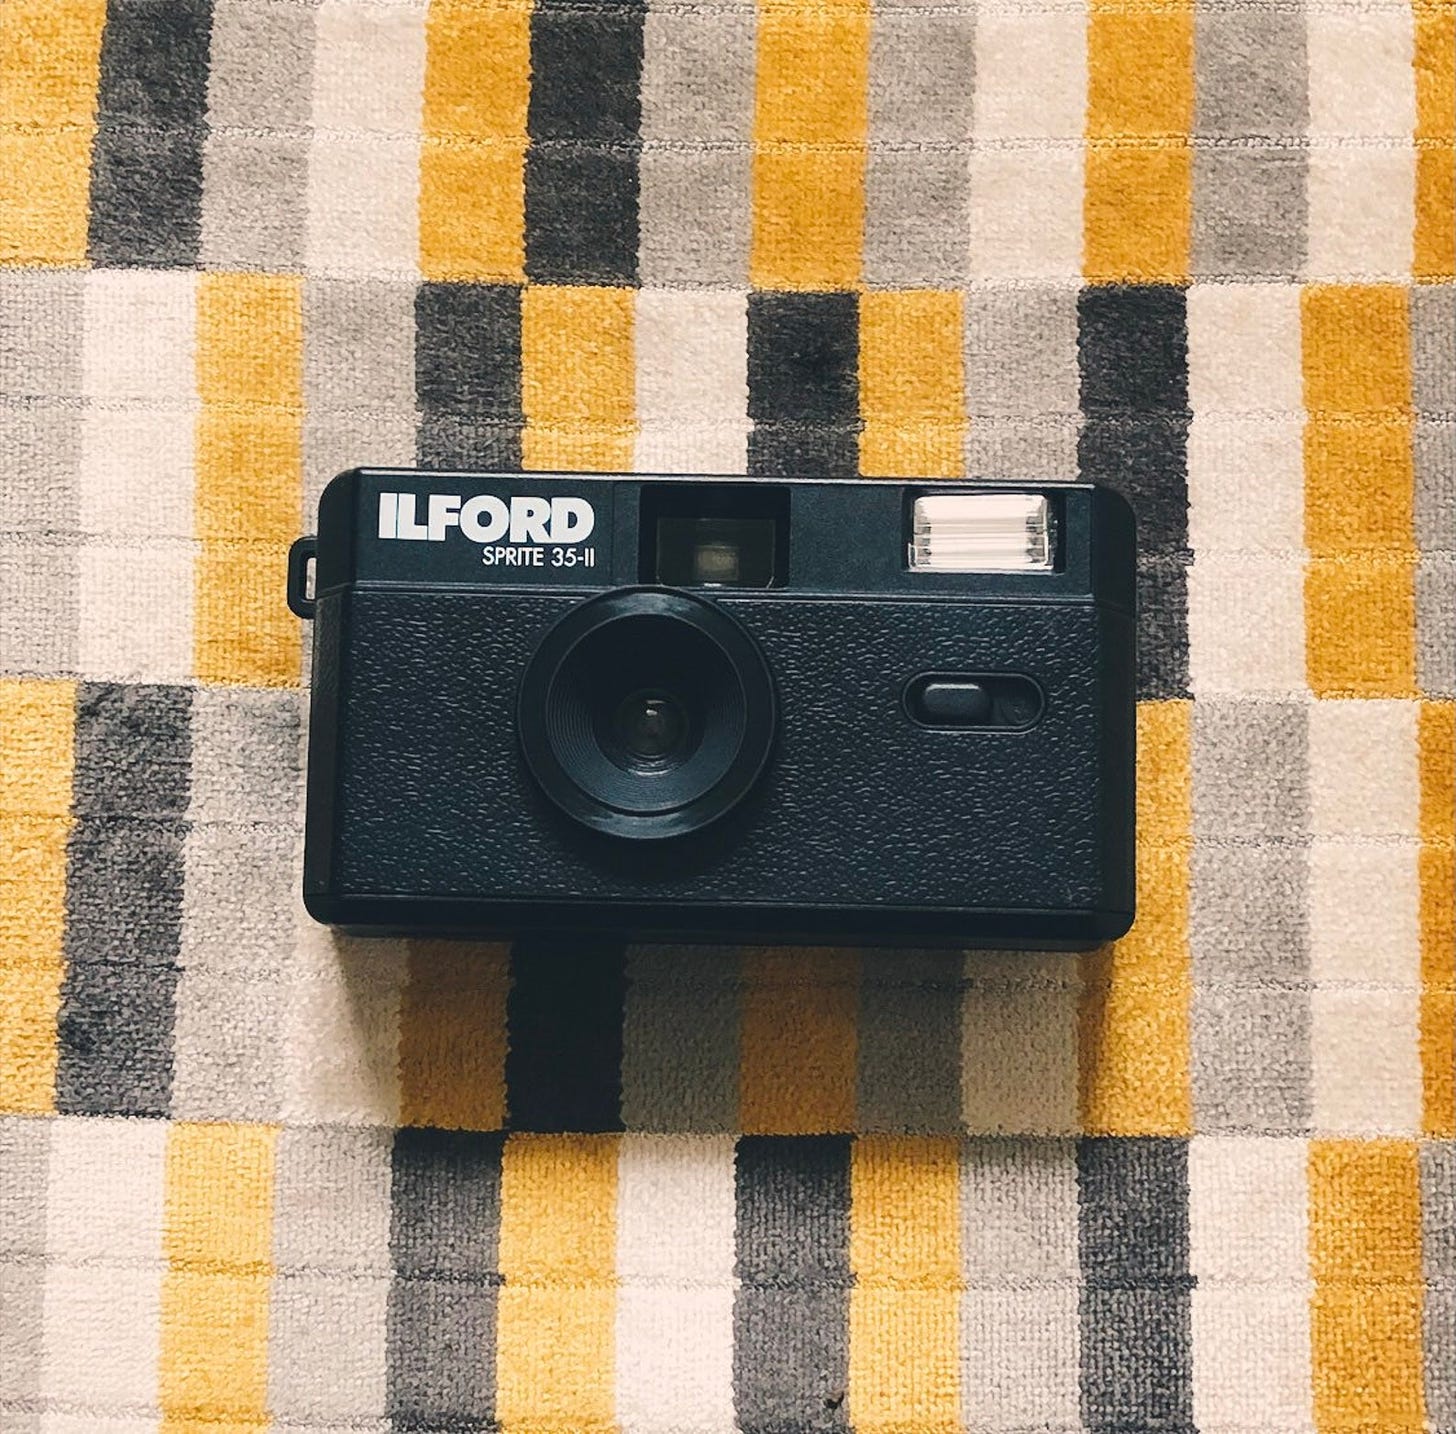 A black rectangular film camera with the word ILFORD in the top right corner in front of a striped carpet.